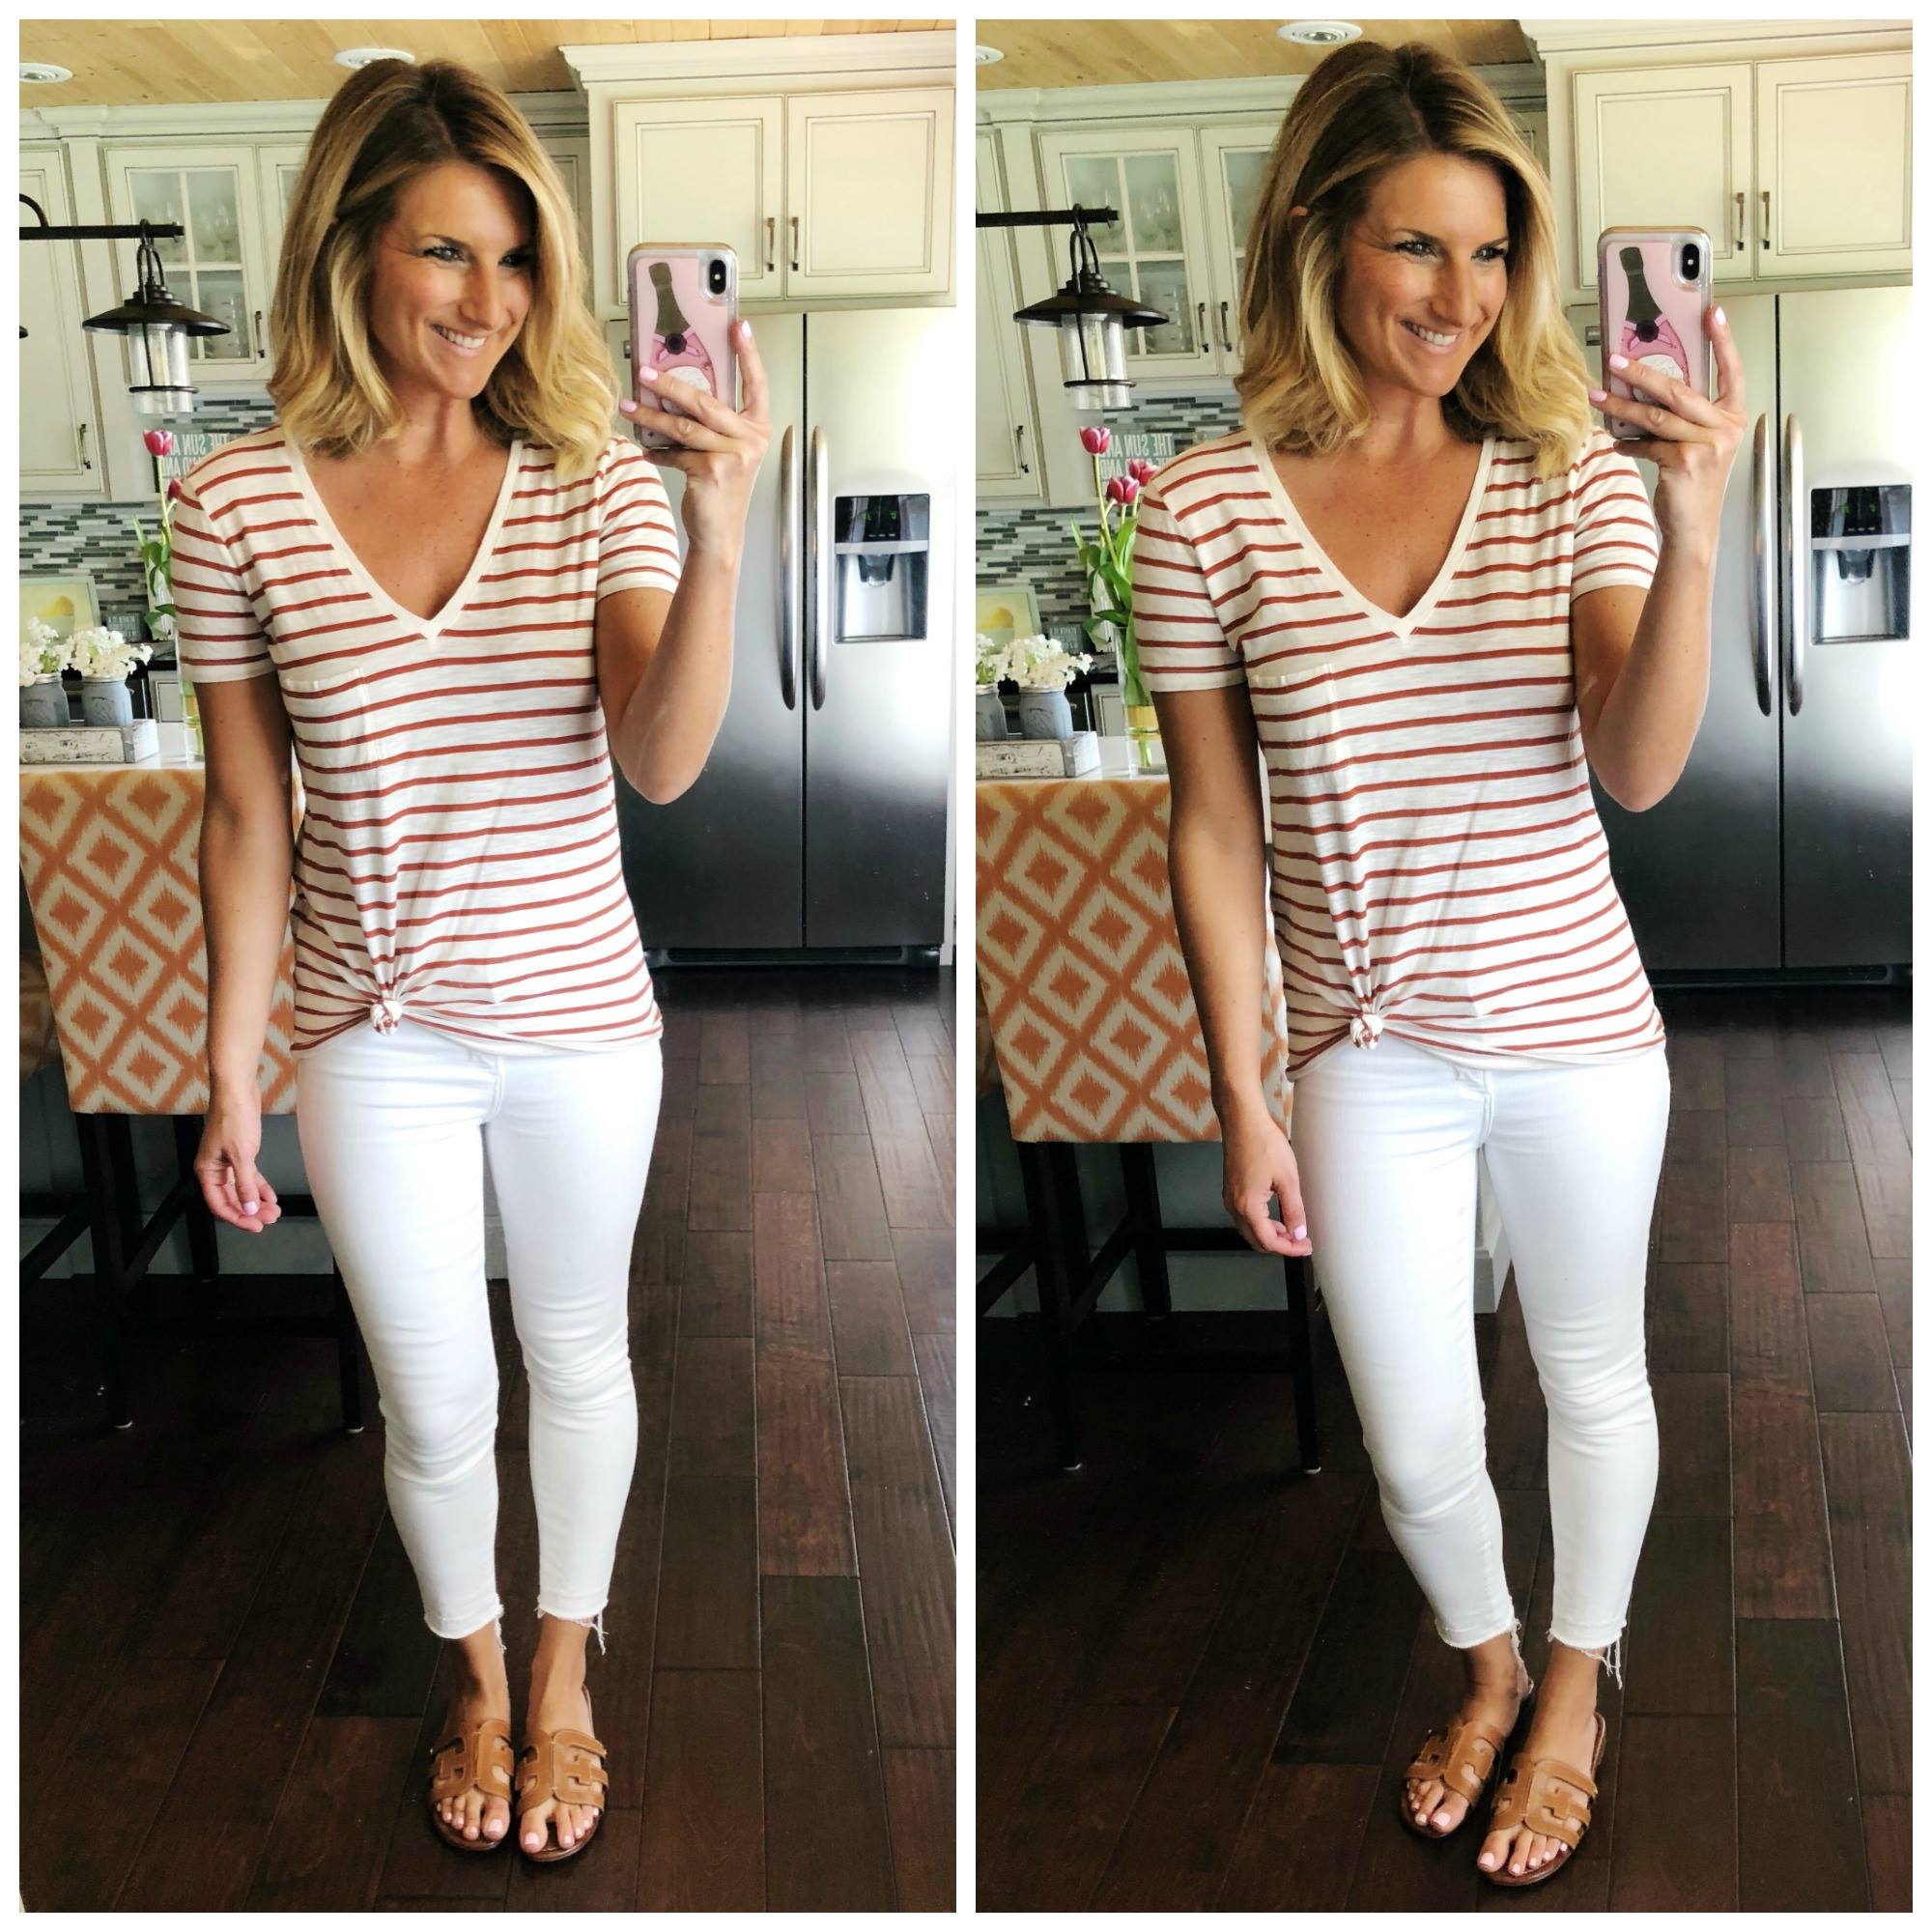 How to tie a tee // what to wear with white jeans // v neck top with white jeans and slide sandals